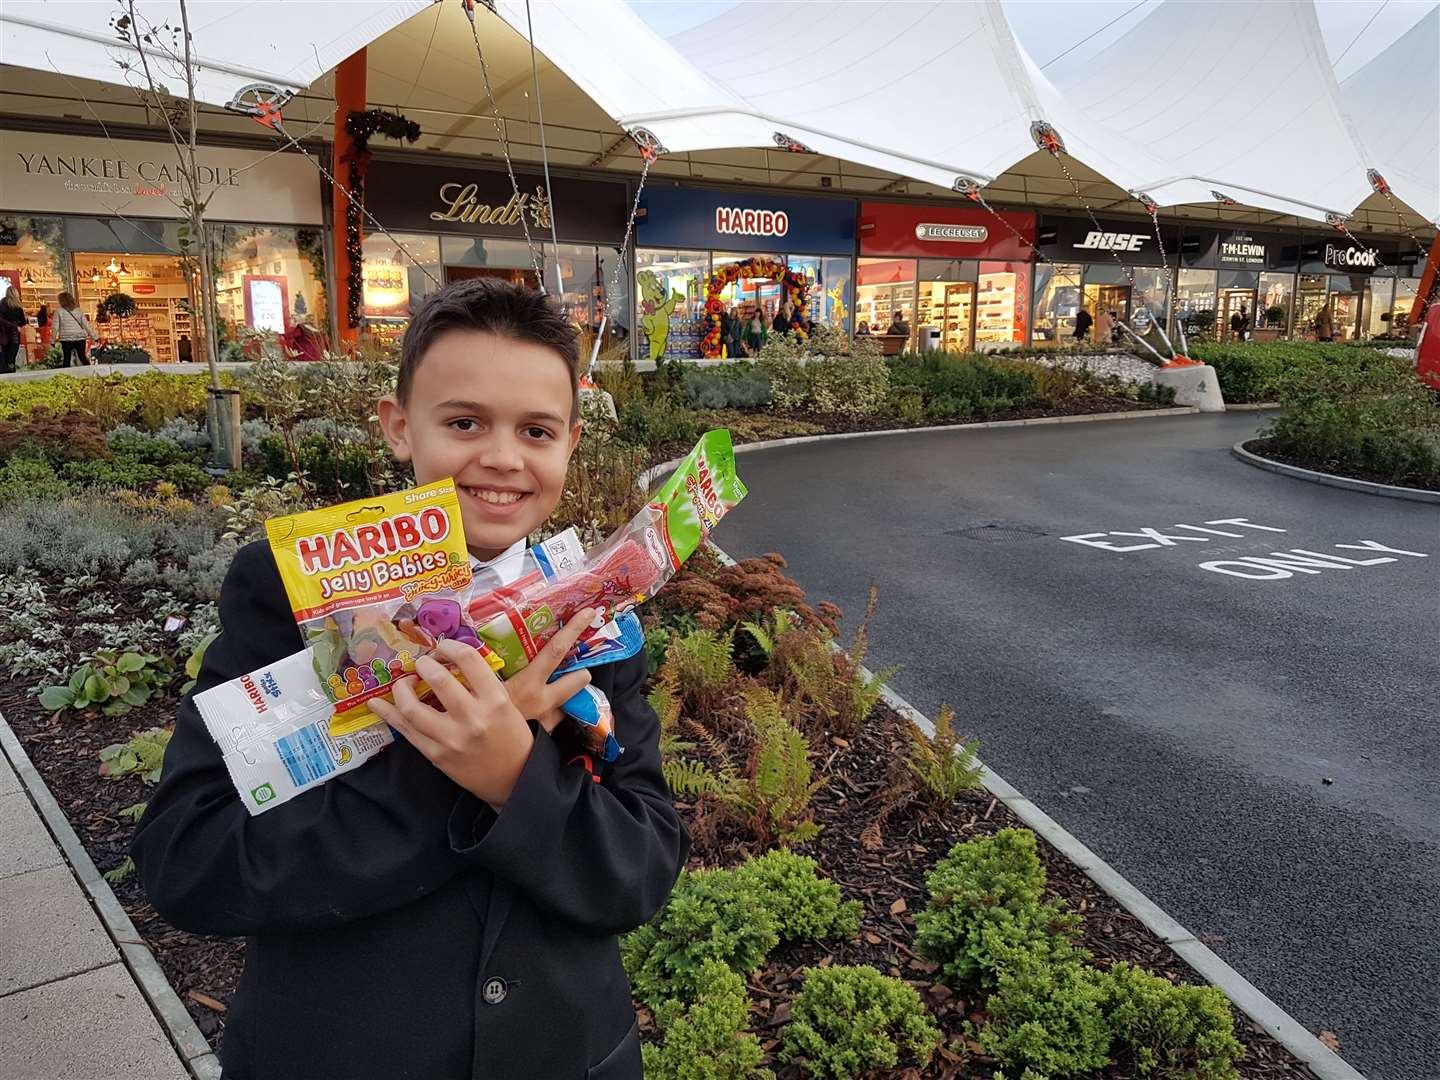 11-year-old Nicholas Leonidou was pleased with his Haribo experience